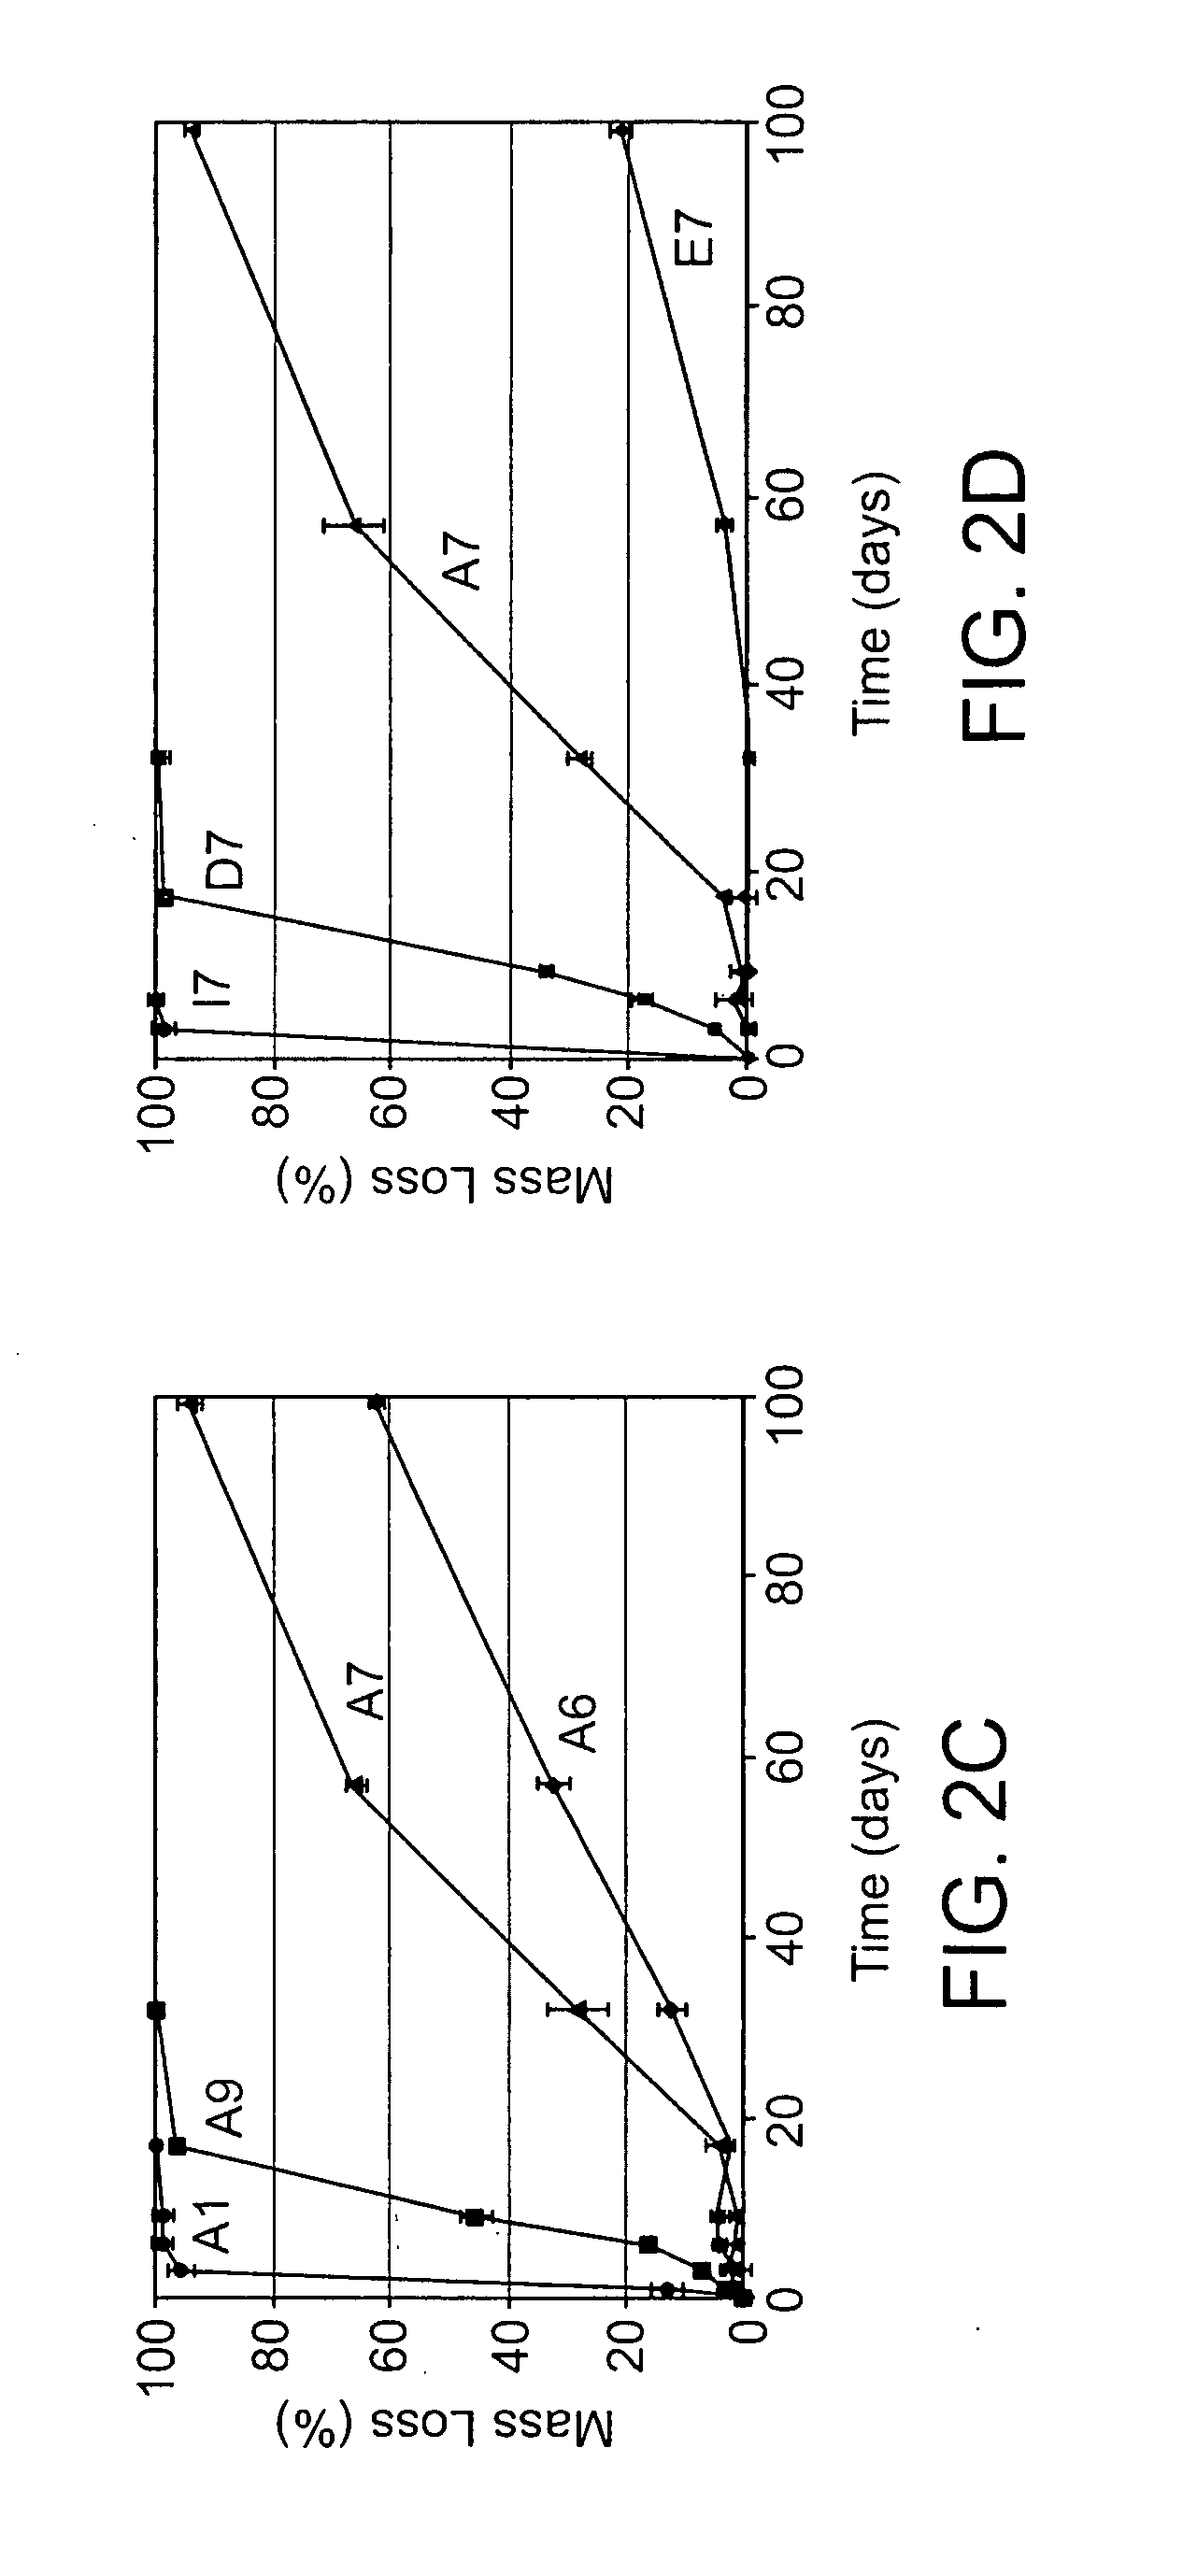 Crosslinked, degradable polymers and uses thereof